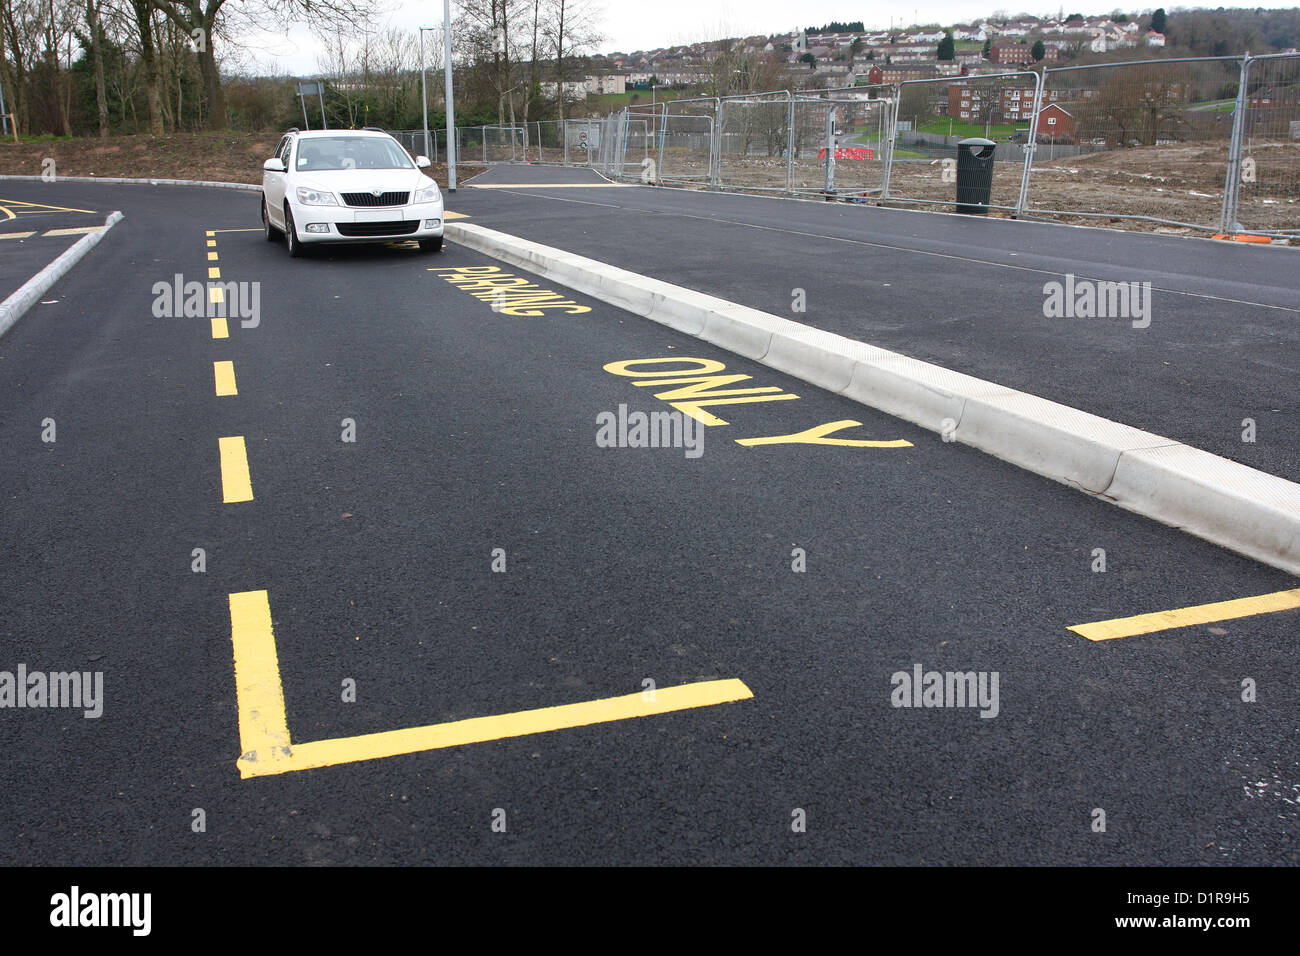 New bus parking bay at a large senior school with a car parked in it, 13th January 2013 Stock Photo